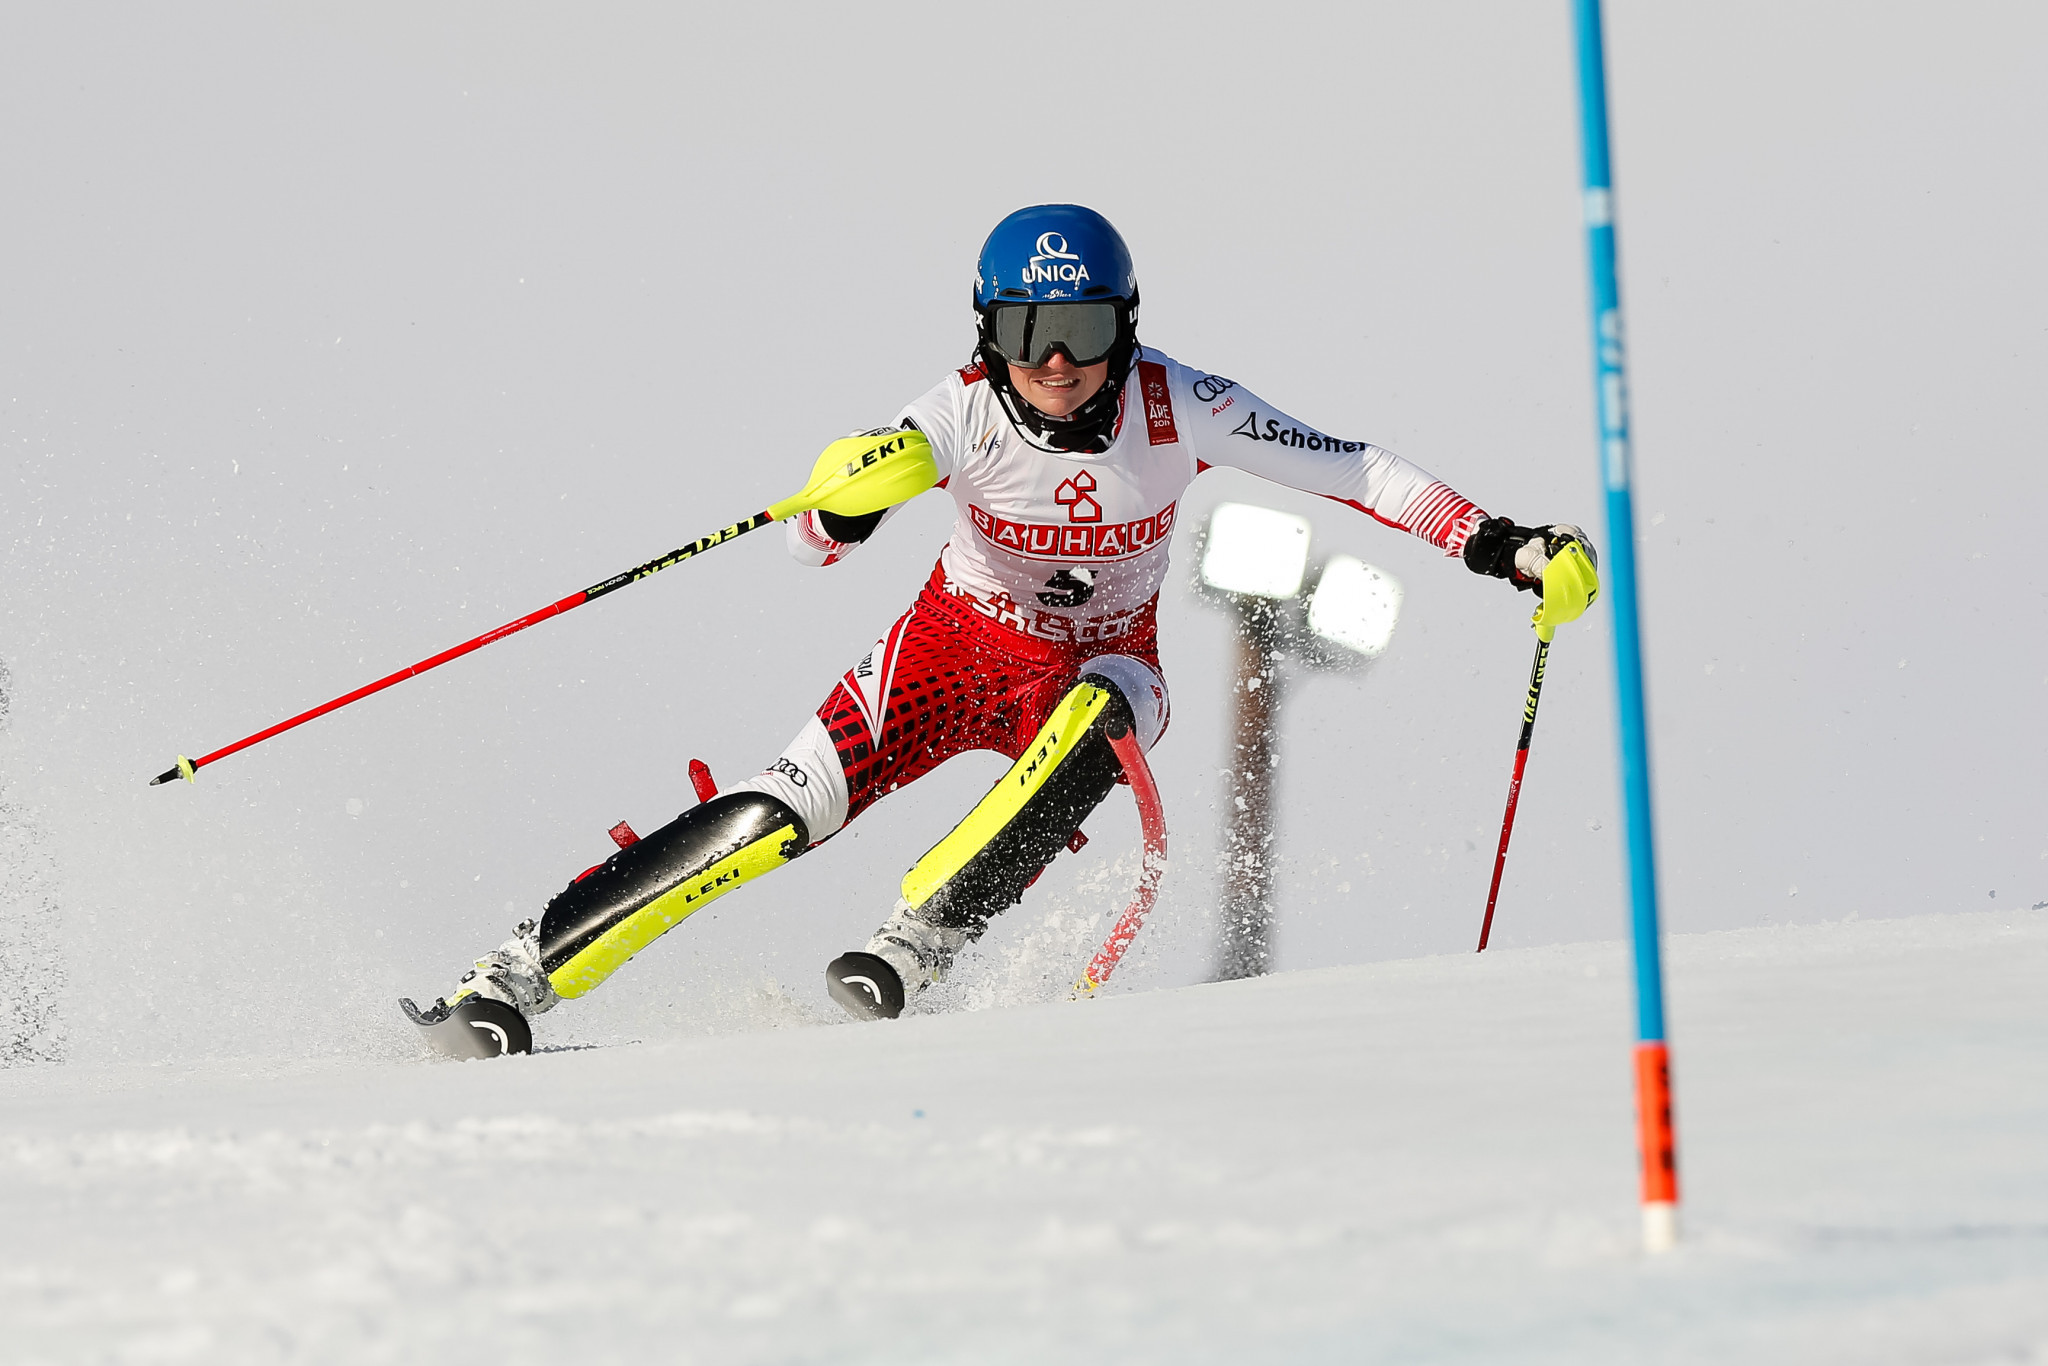 The slalom competition was the final women's event of the Championships ©Getty Images